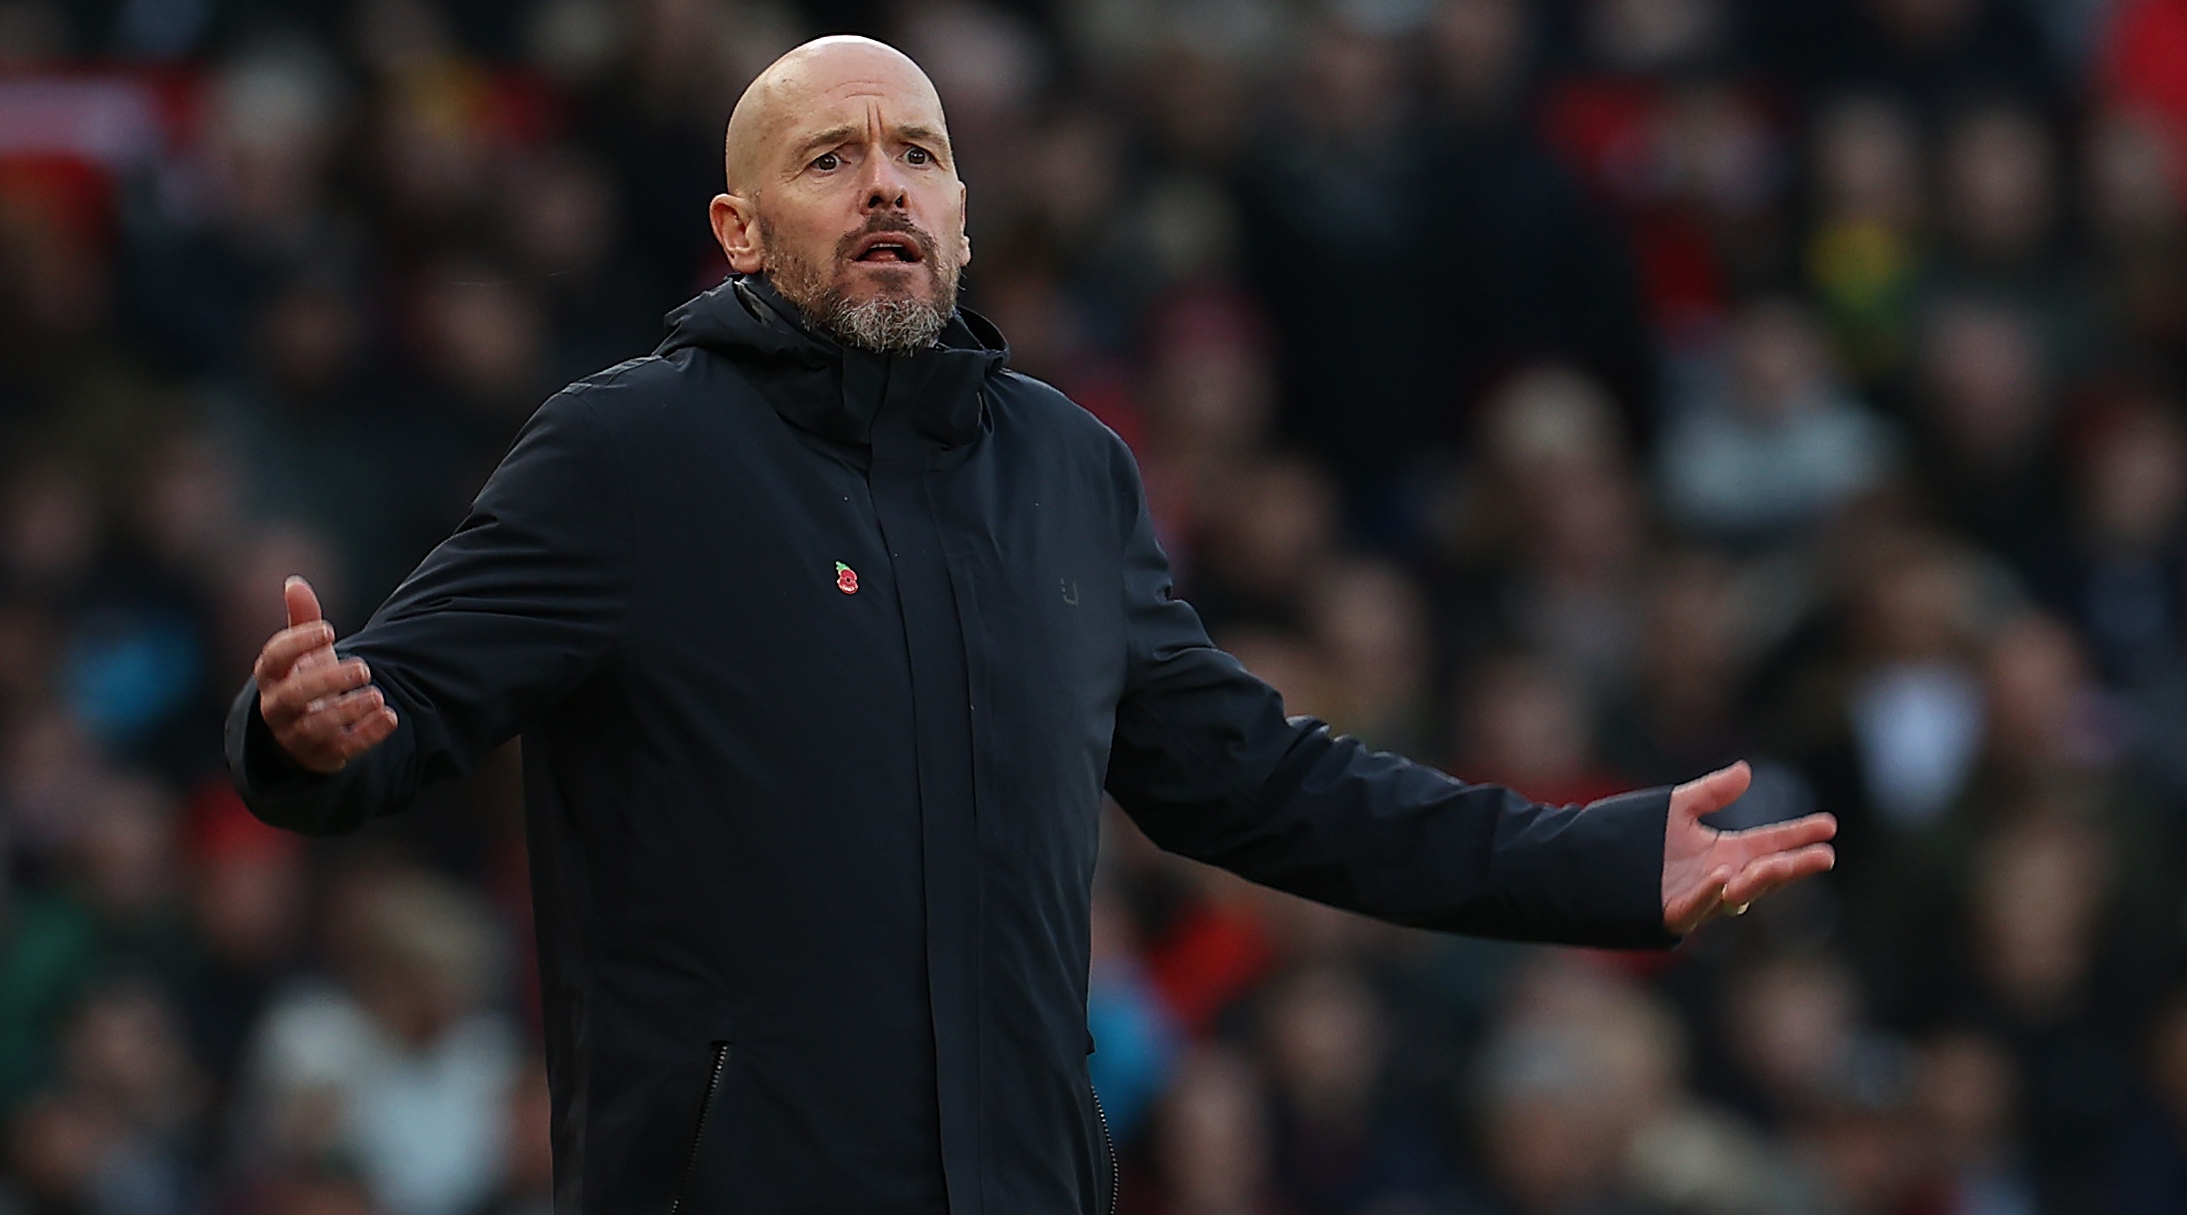 Why will Manchester United manager Erik ten Hag not be in the dugout against Everton?